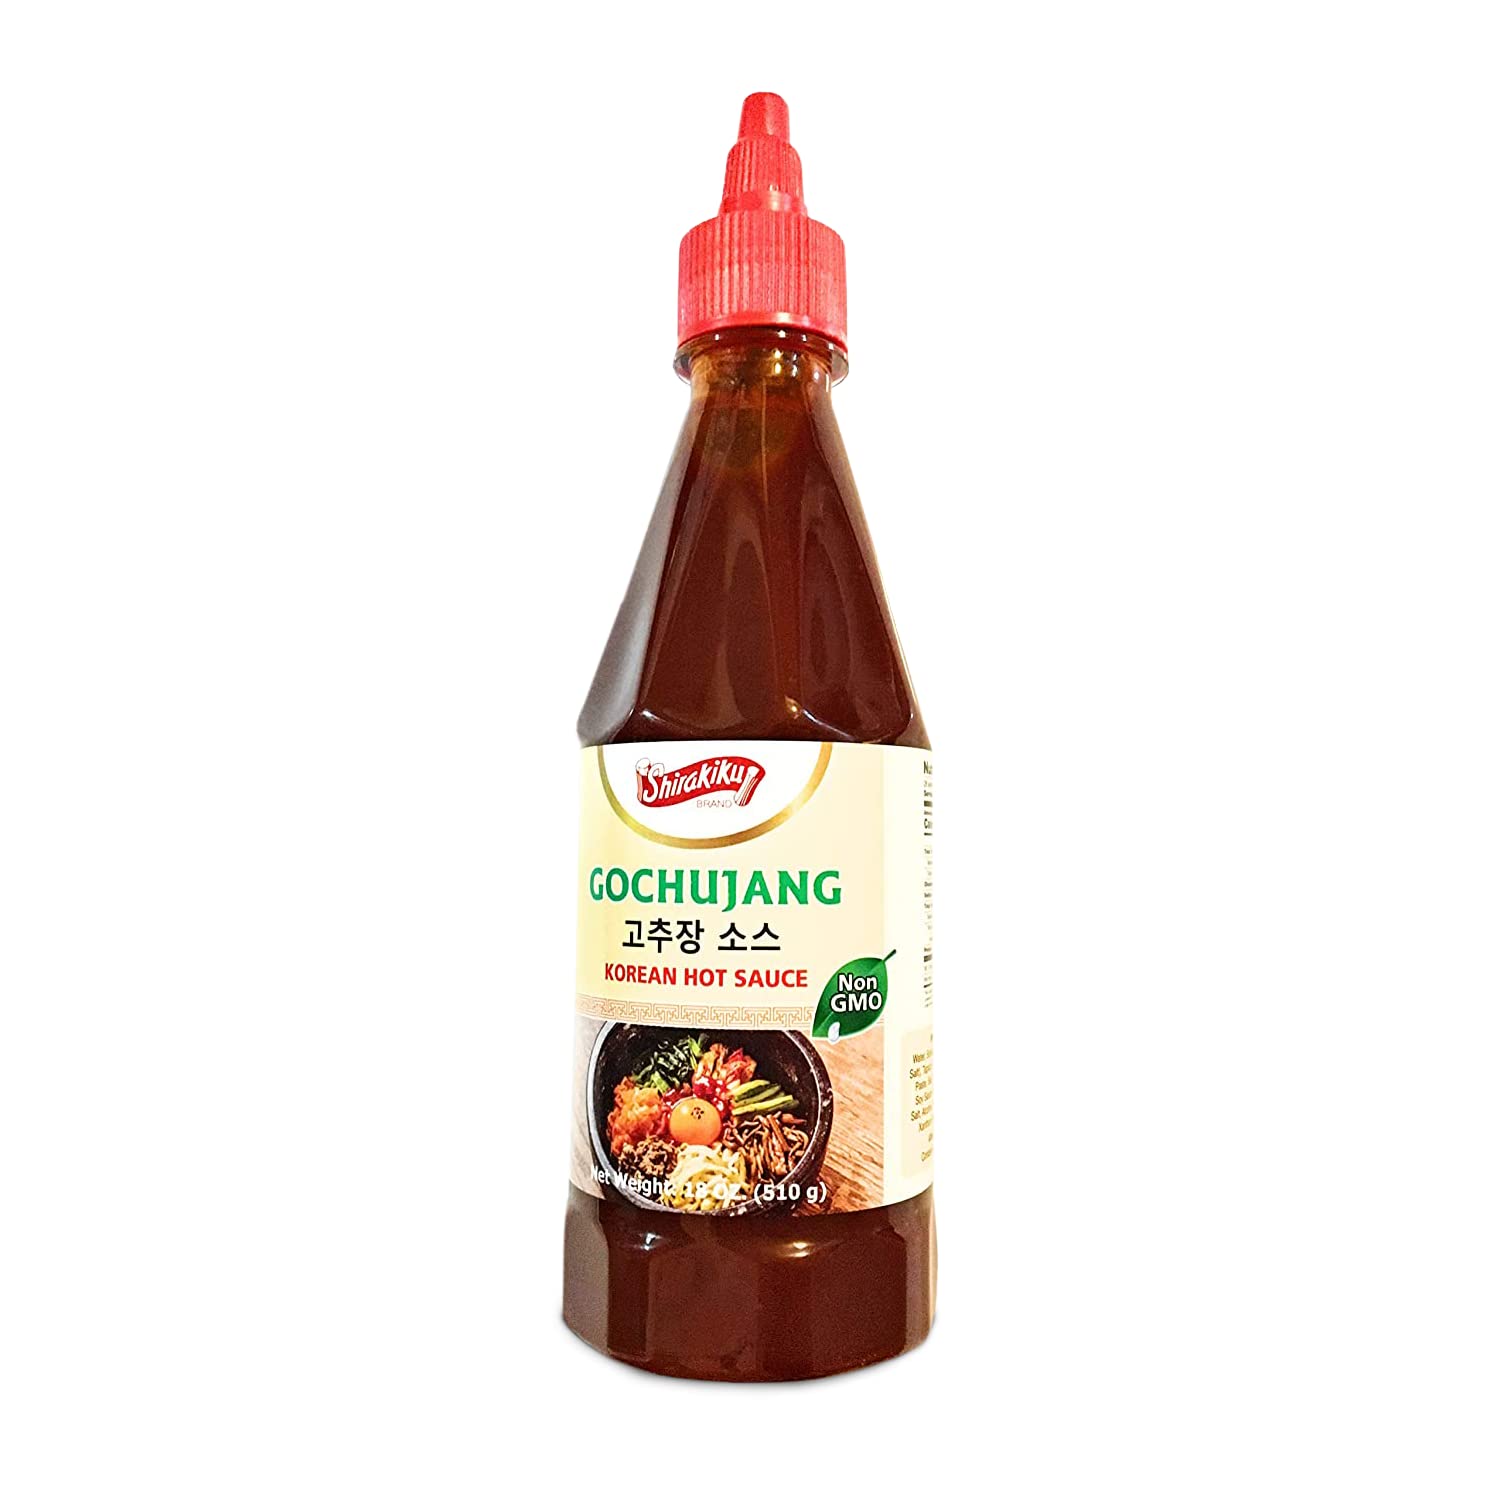 Shirakiku Gochujang Hot Sauce | Korean Non-GMO With Soybean, Tapioca Syrup Base and Salt | Perfect for Authentic Asian Cuisine | Convenient Squeezable Bottle with Twist Cap 18 oz